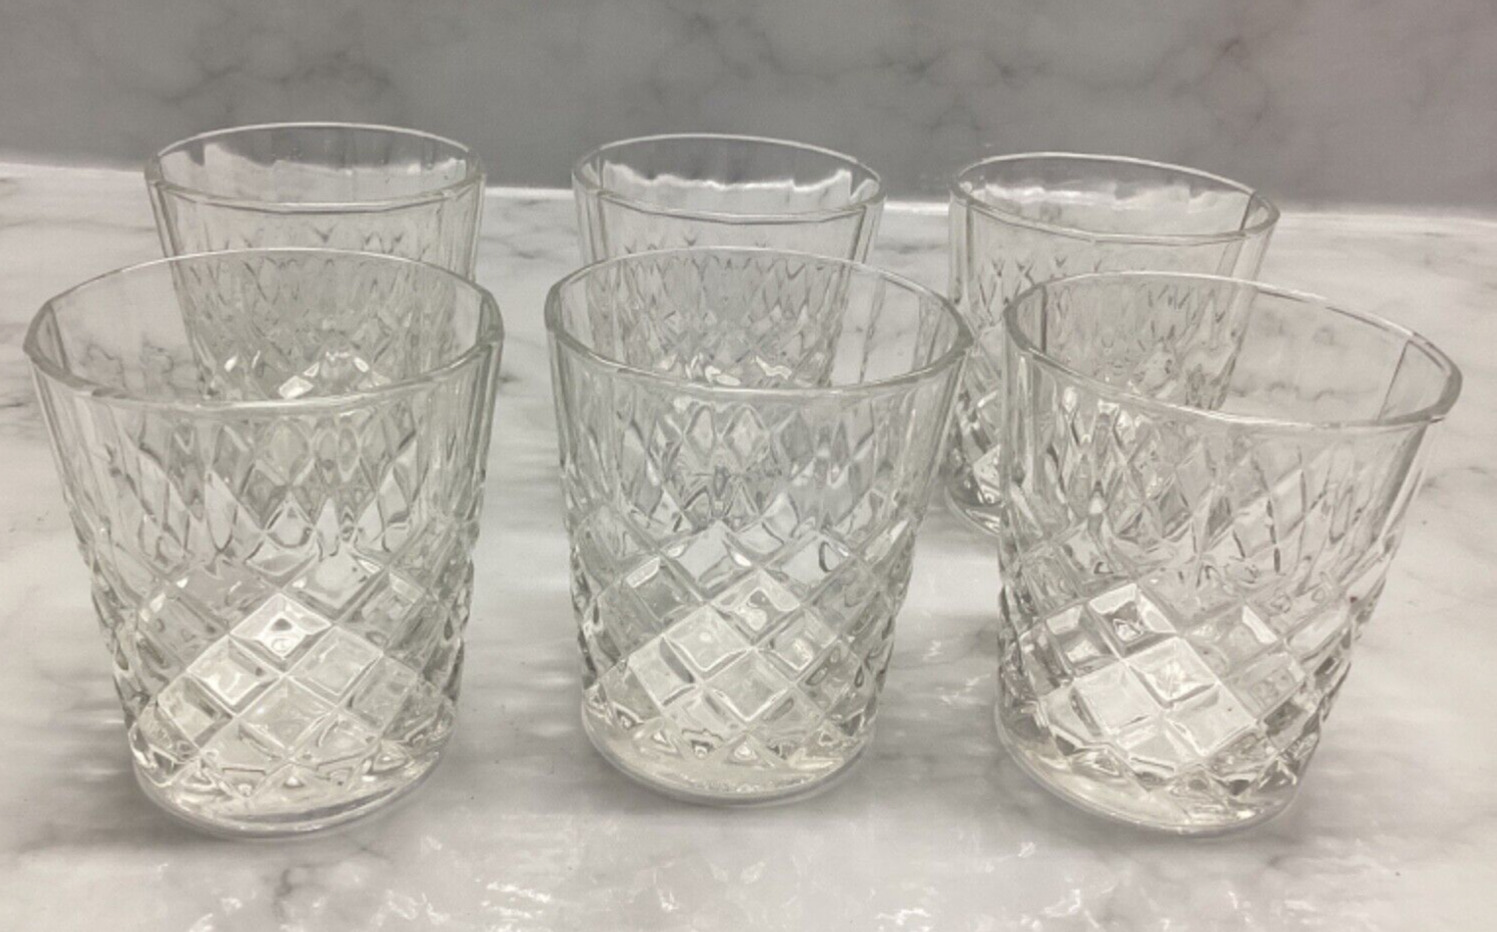 Drambuie Scotch Whiskey Cocktail Glasses Embossed Diamond Cut Clear set of 6